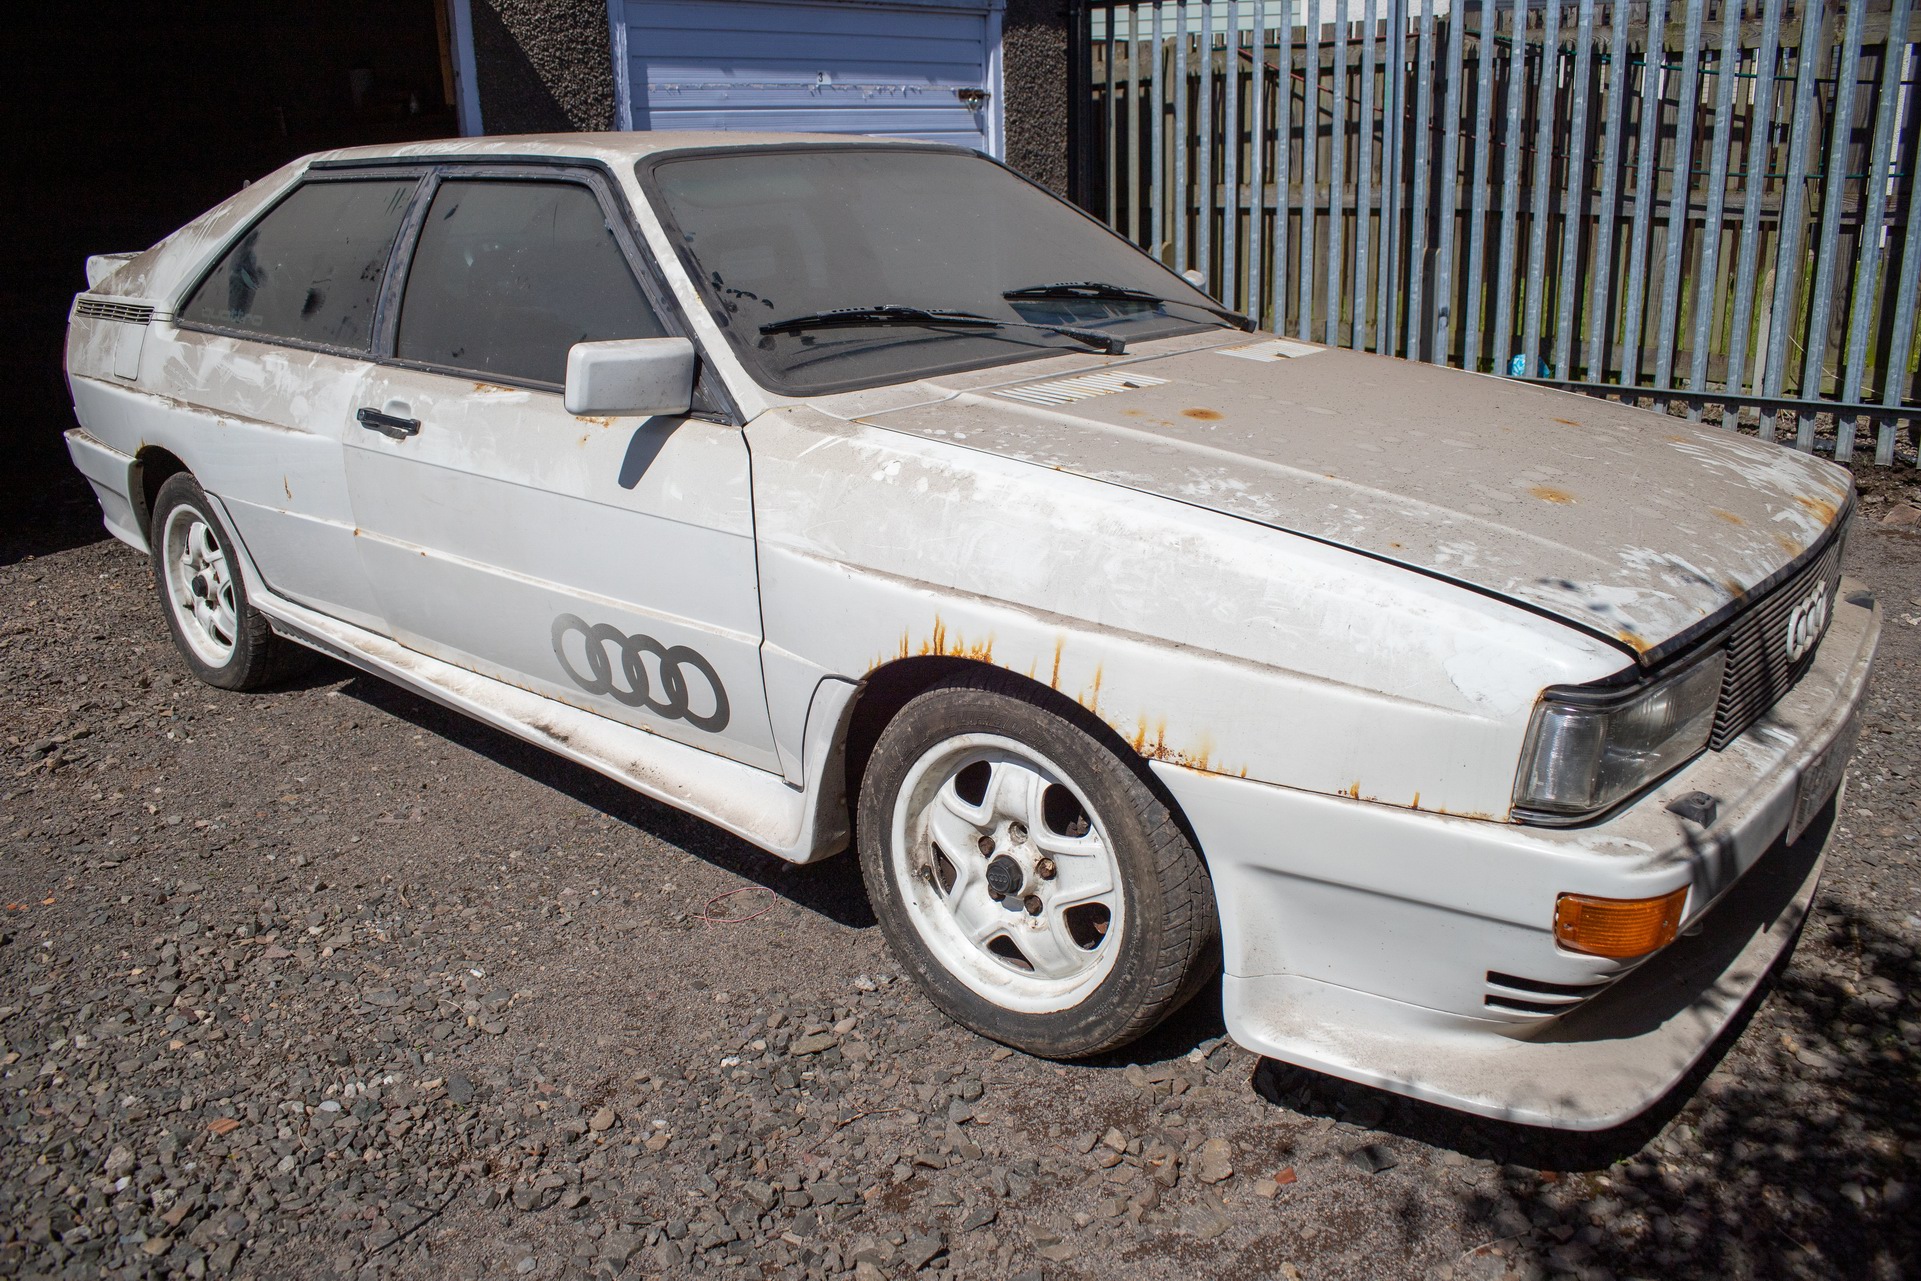 Someone had a 1982 Audi Quattro Turbo in the barn for almost 30 years.